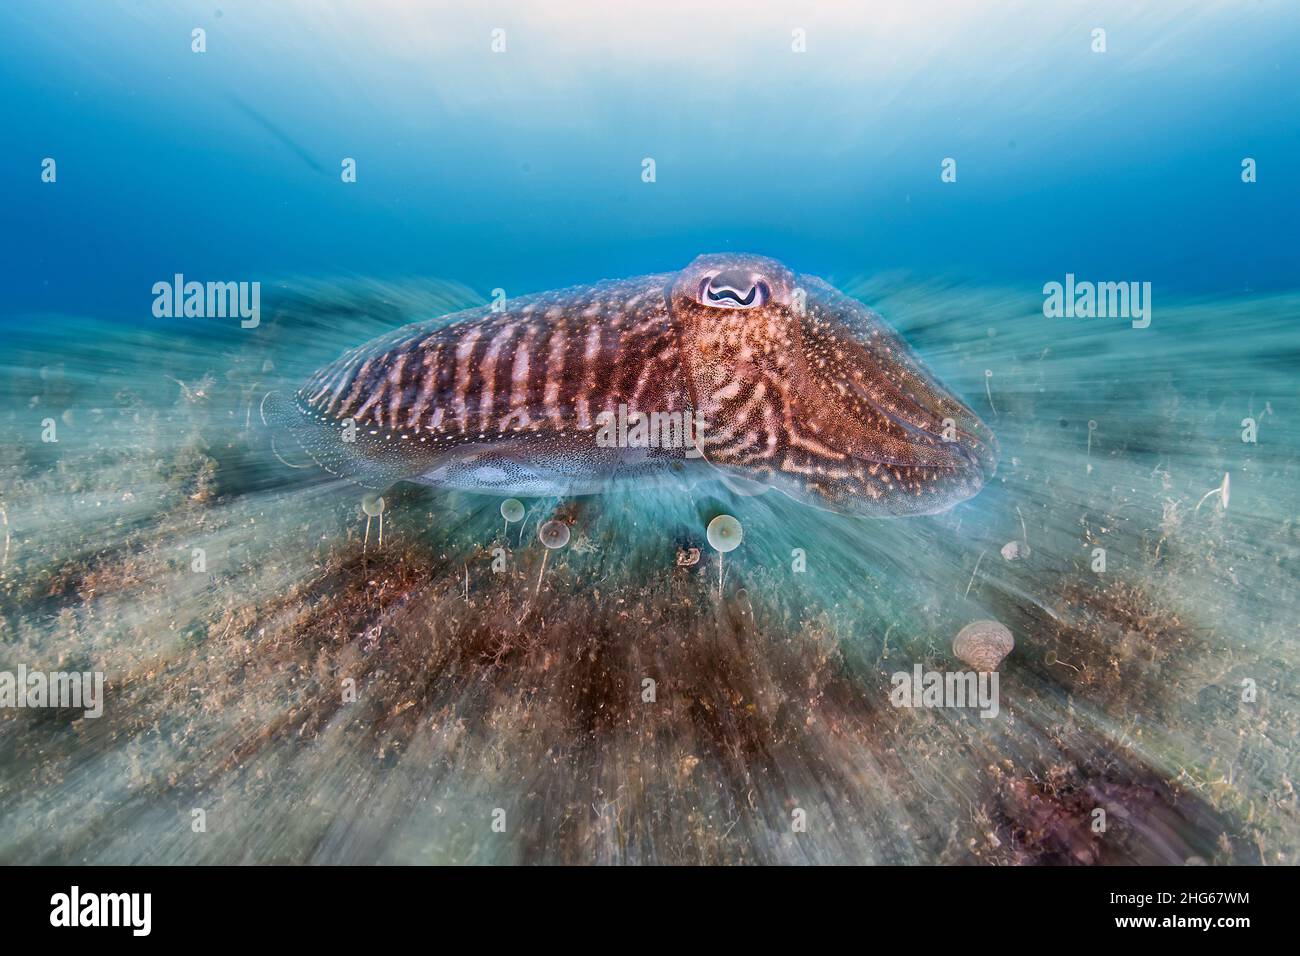 A common cuttlefish in a zoomed portrait Stock Photo